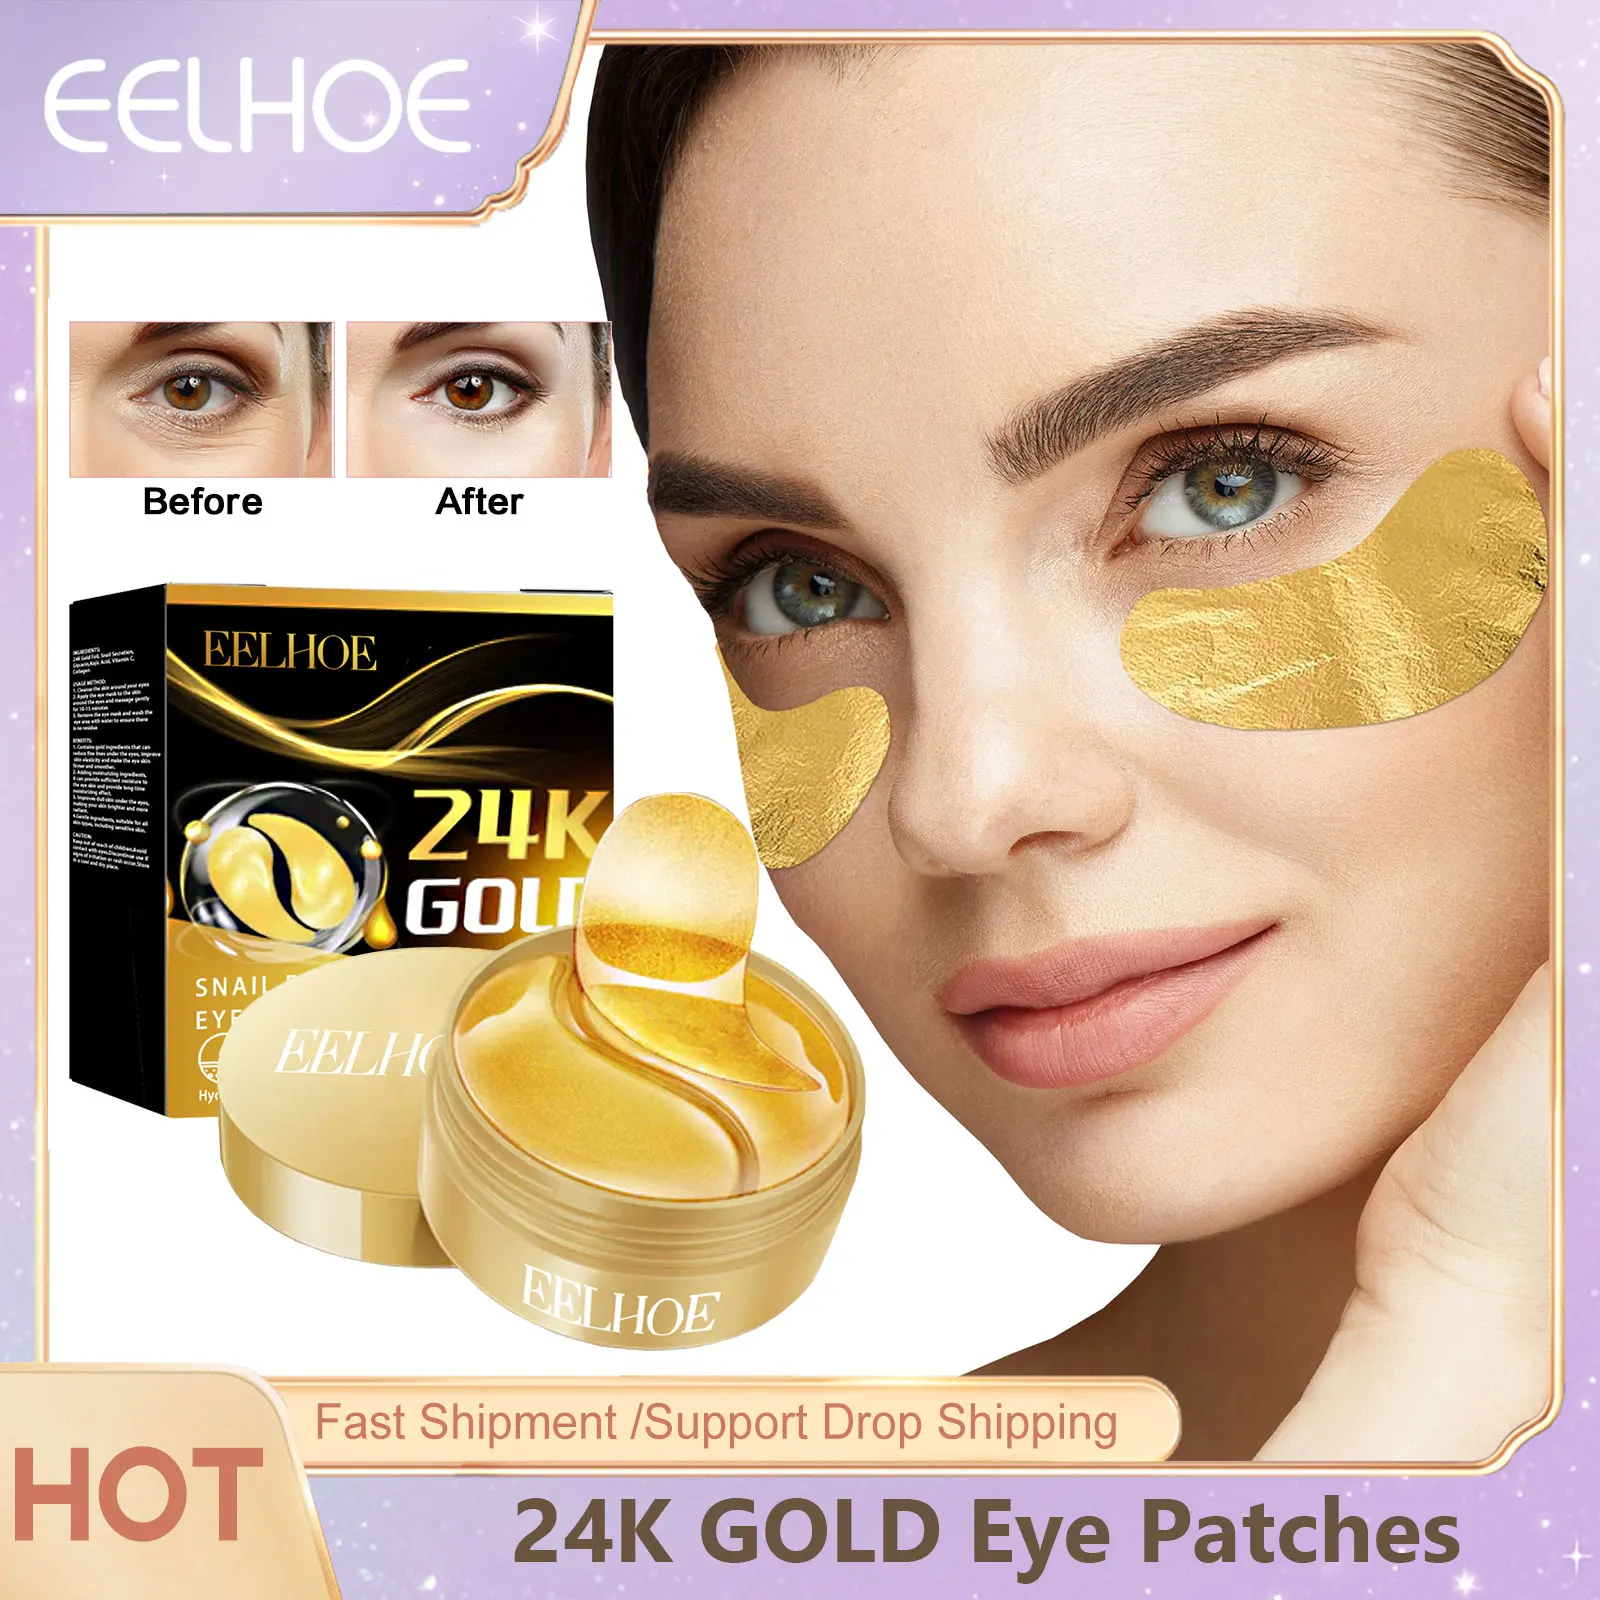 24K Gold Collagen Eye Mask Patches Wrinkles Fine Lines Remove Dark Circle Nourishing Anti Aging Skin Care Moisturize Around Eyes remove wrinkles around eyes fade dark circles eye care coffee essence tender and firming care for eye skin eye cream